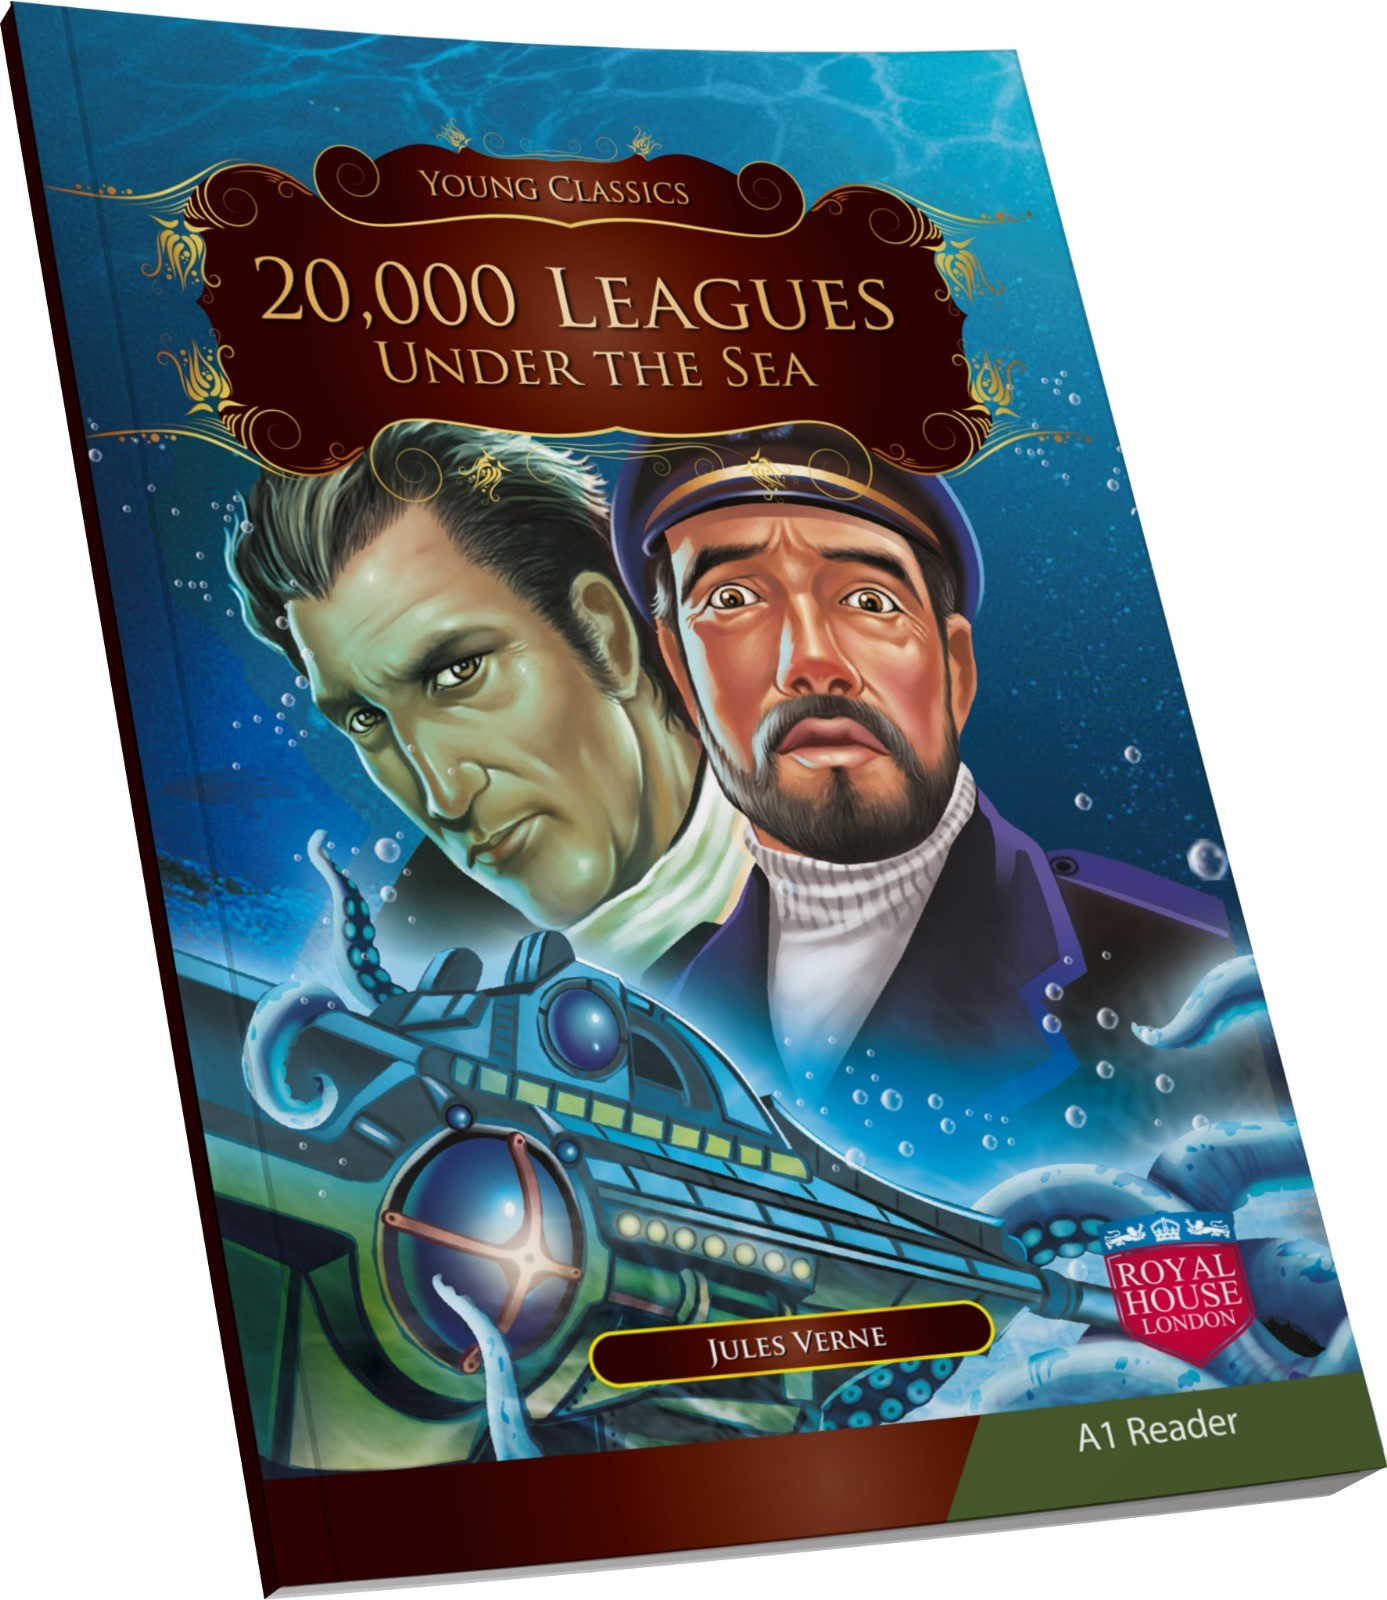 20,000 LEAGUES UNDER THE SEA A1 Reader